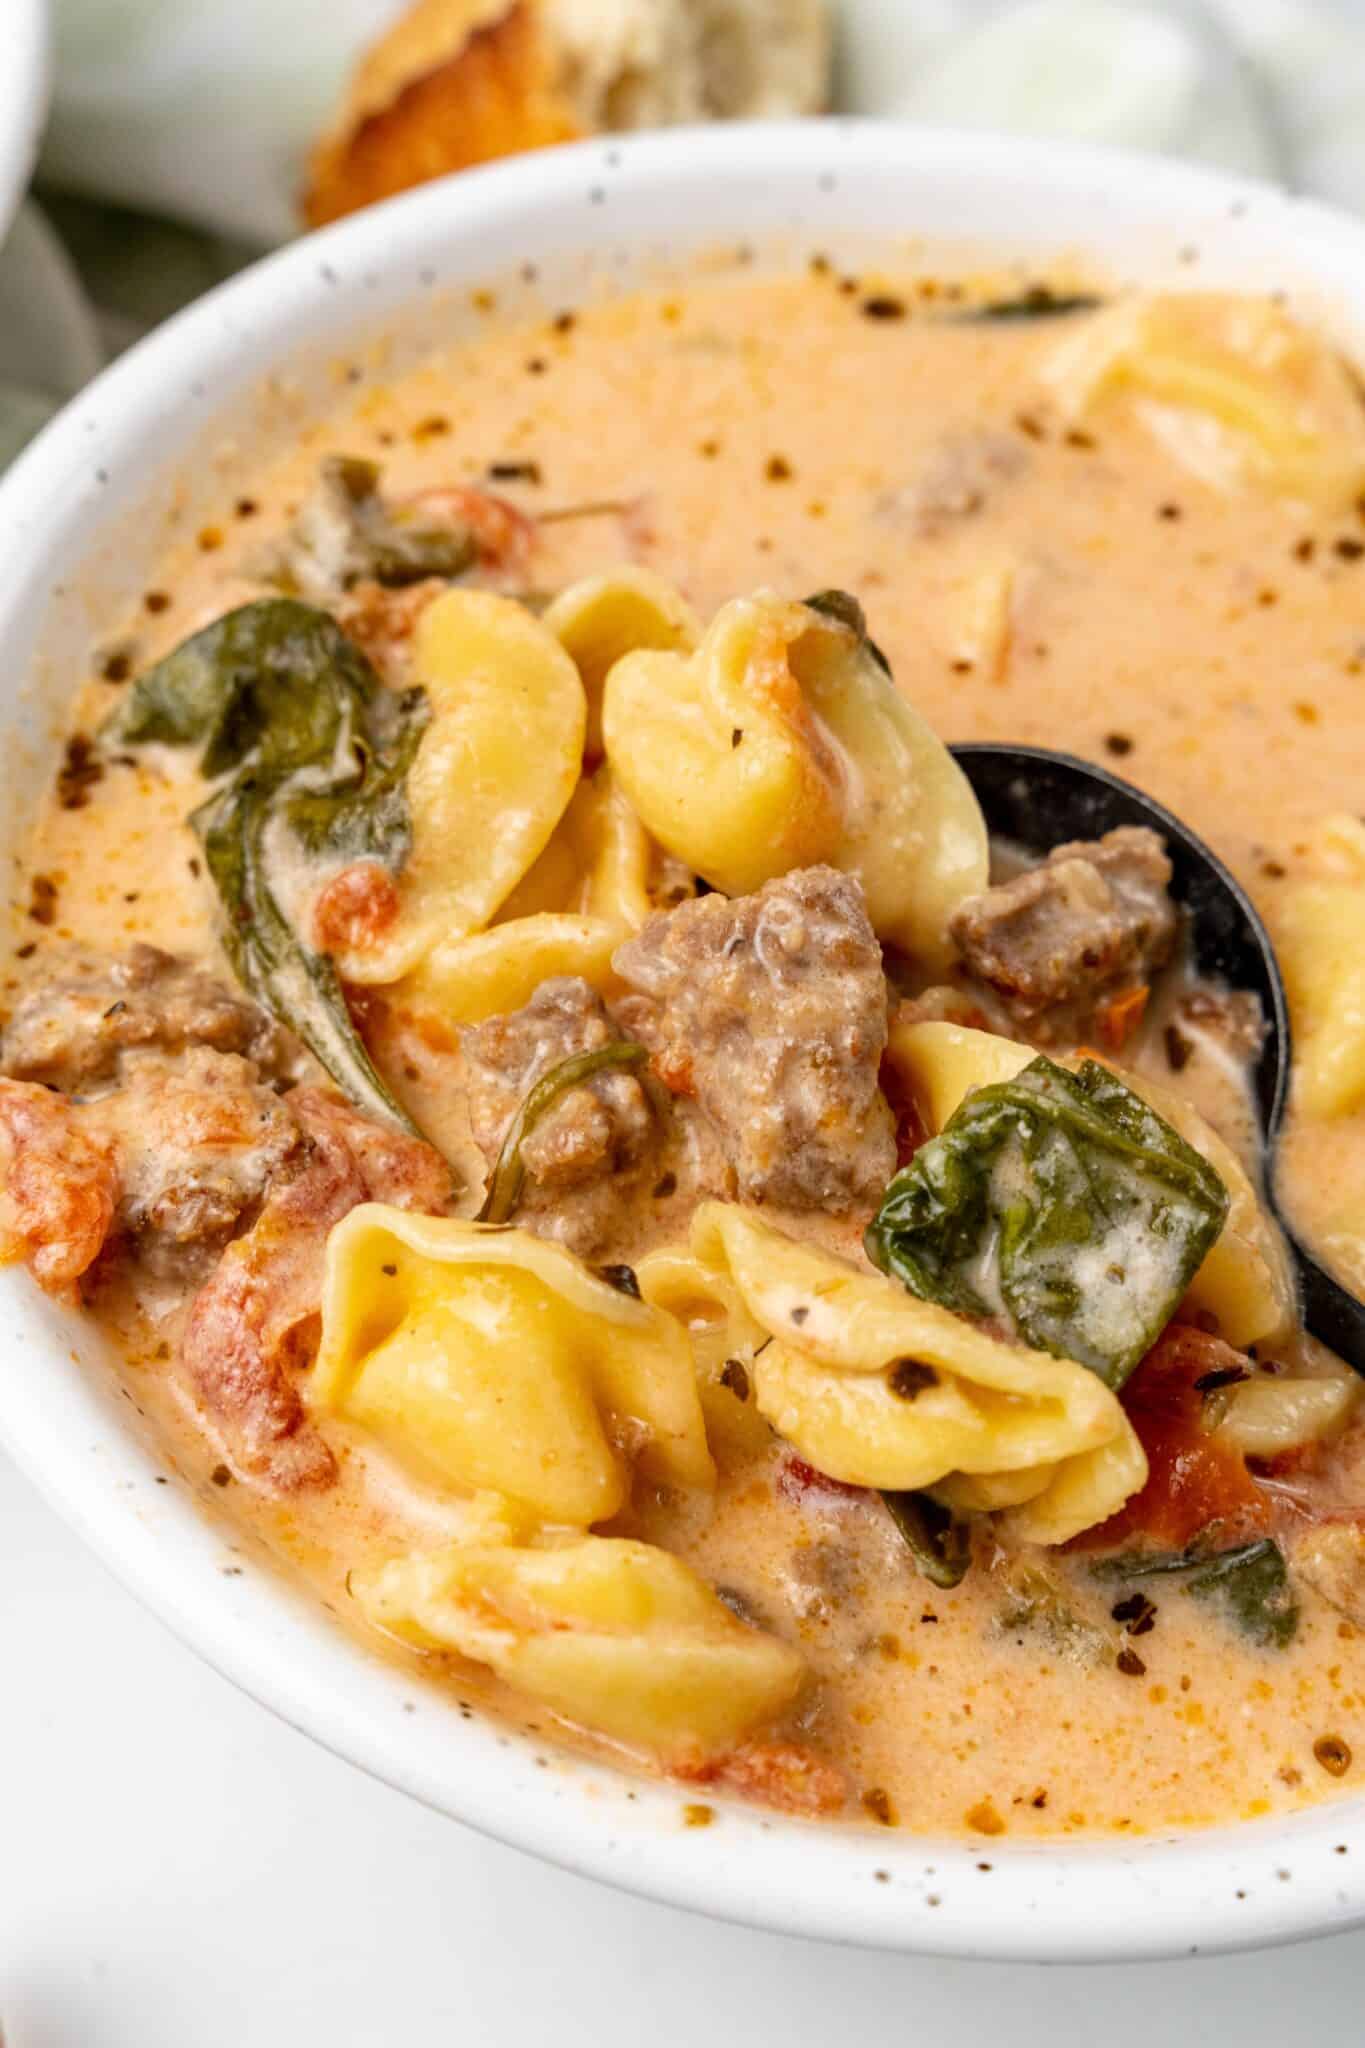 A hearty bowl of beef and tortellini soup served with warm bread.